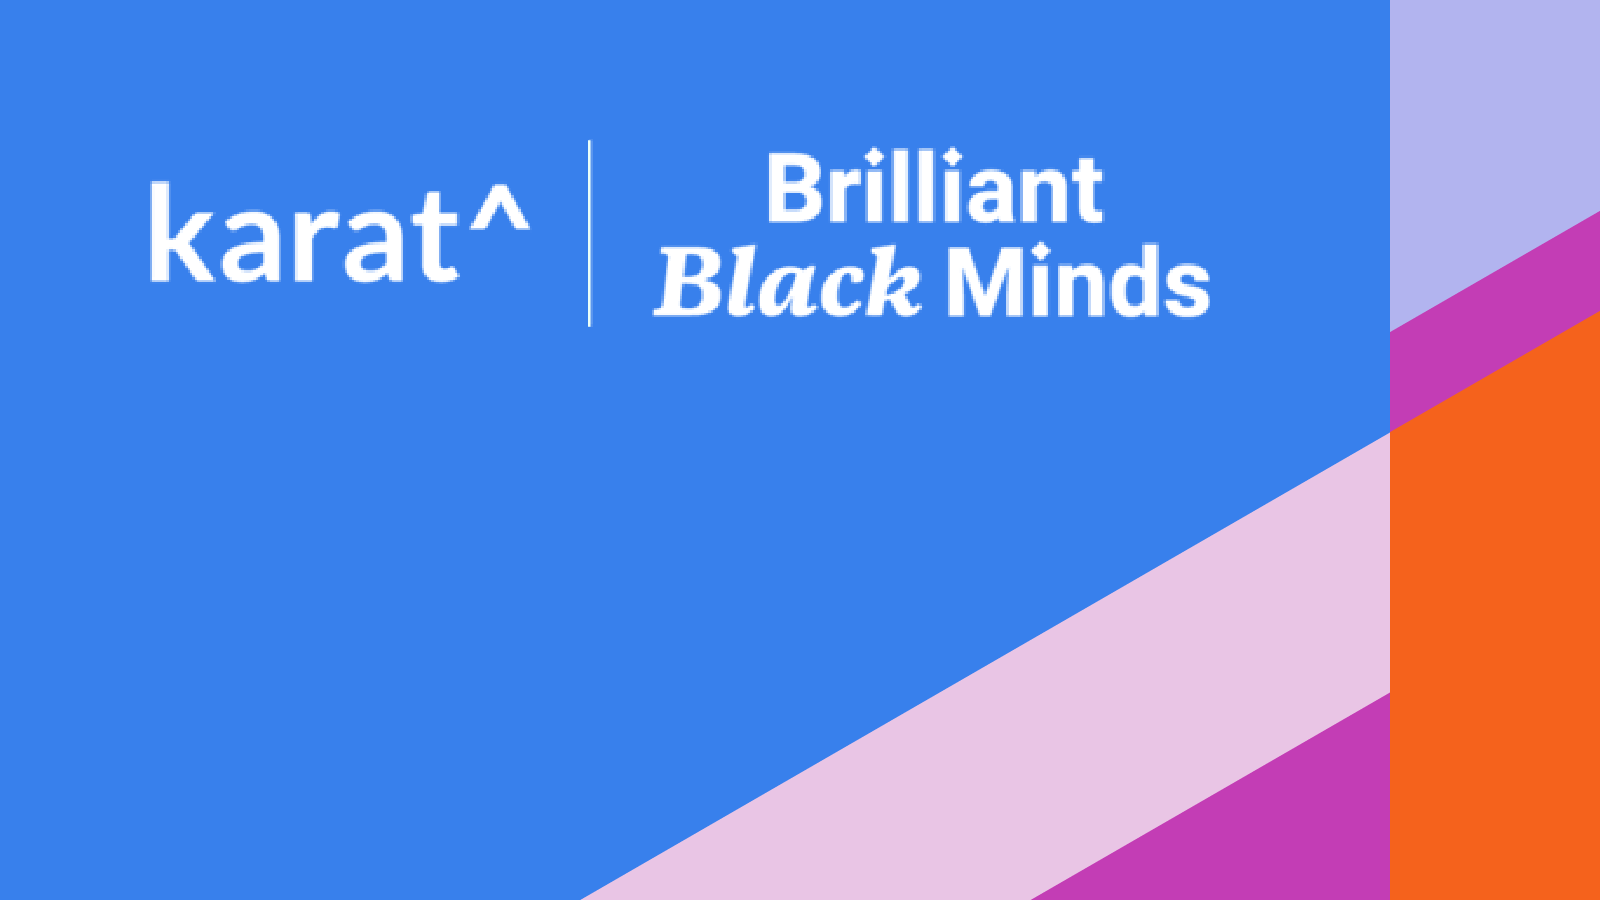 Prime Video, Citi, Duolingo, Indeed, and Flatiron Health Join Karat’s Brilliant Black Minds Movement to Double the Number of Black Software Engineers in Tech